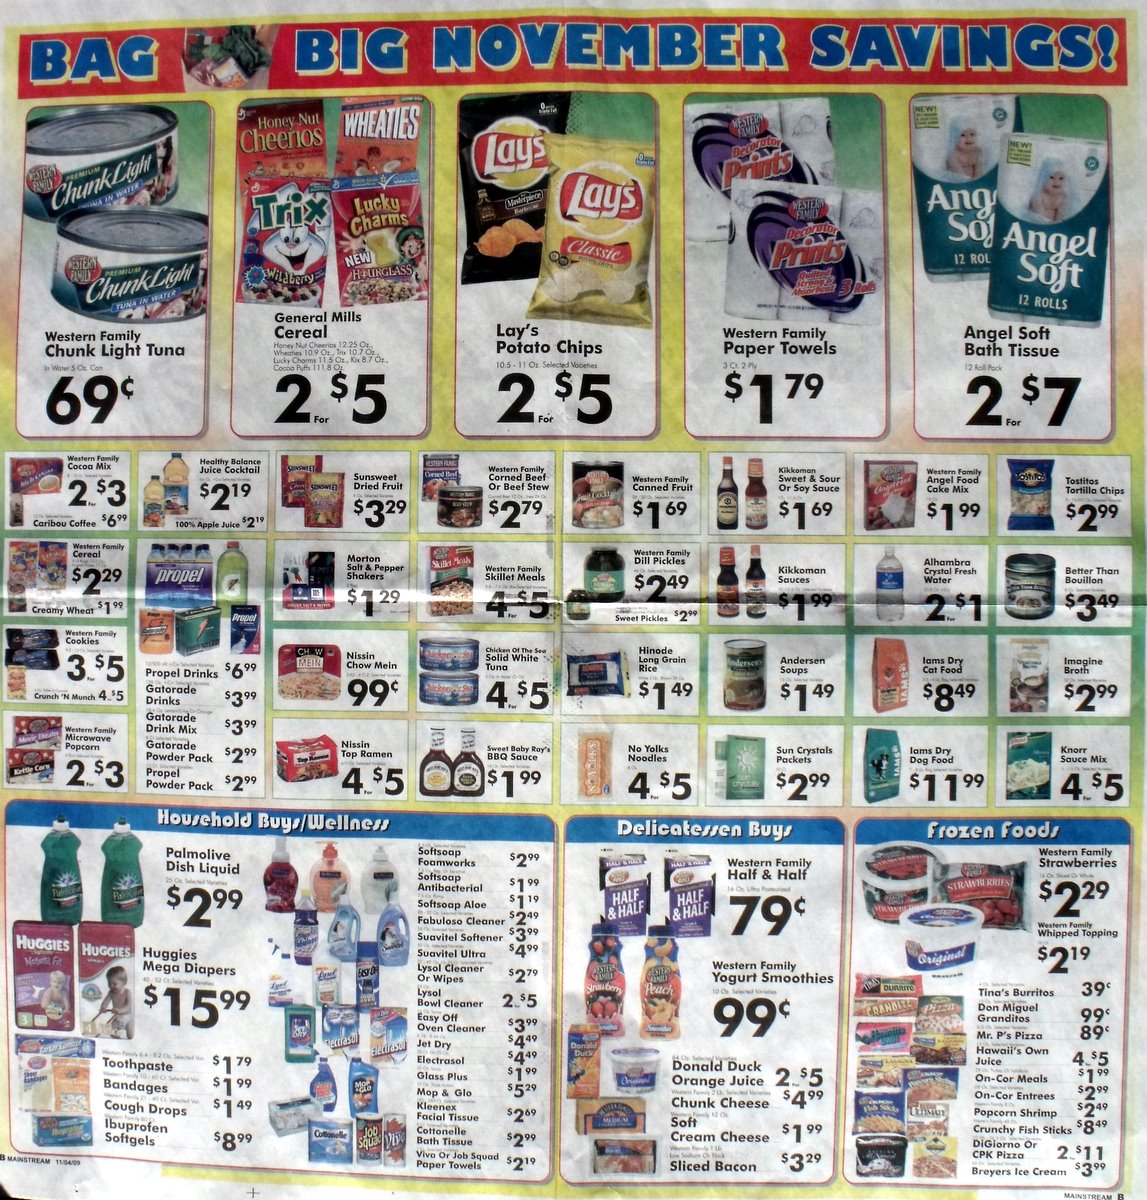 Big Trees Market's Weekly Ad for November 4-10, 2009